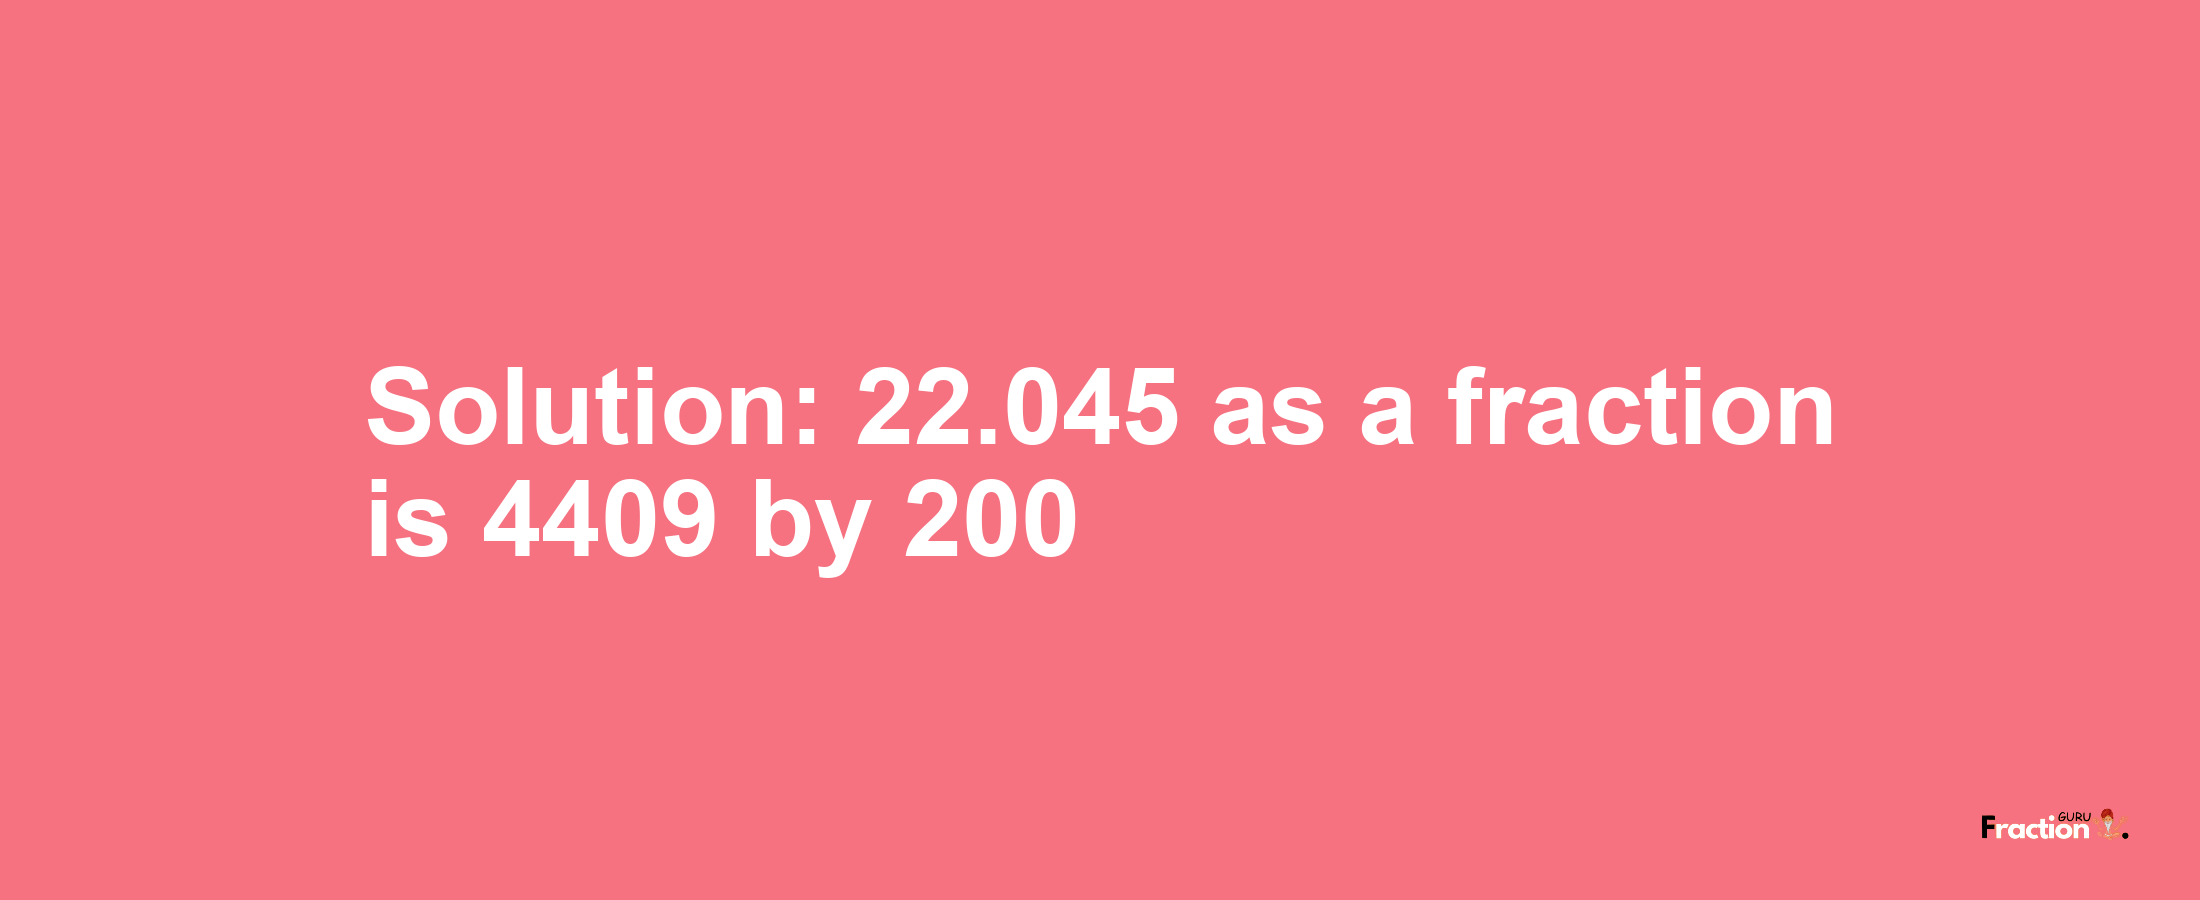 Solution:22.045 as a fraction is 4409/200